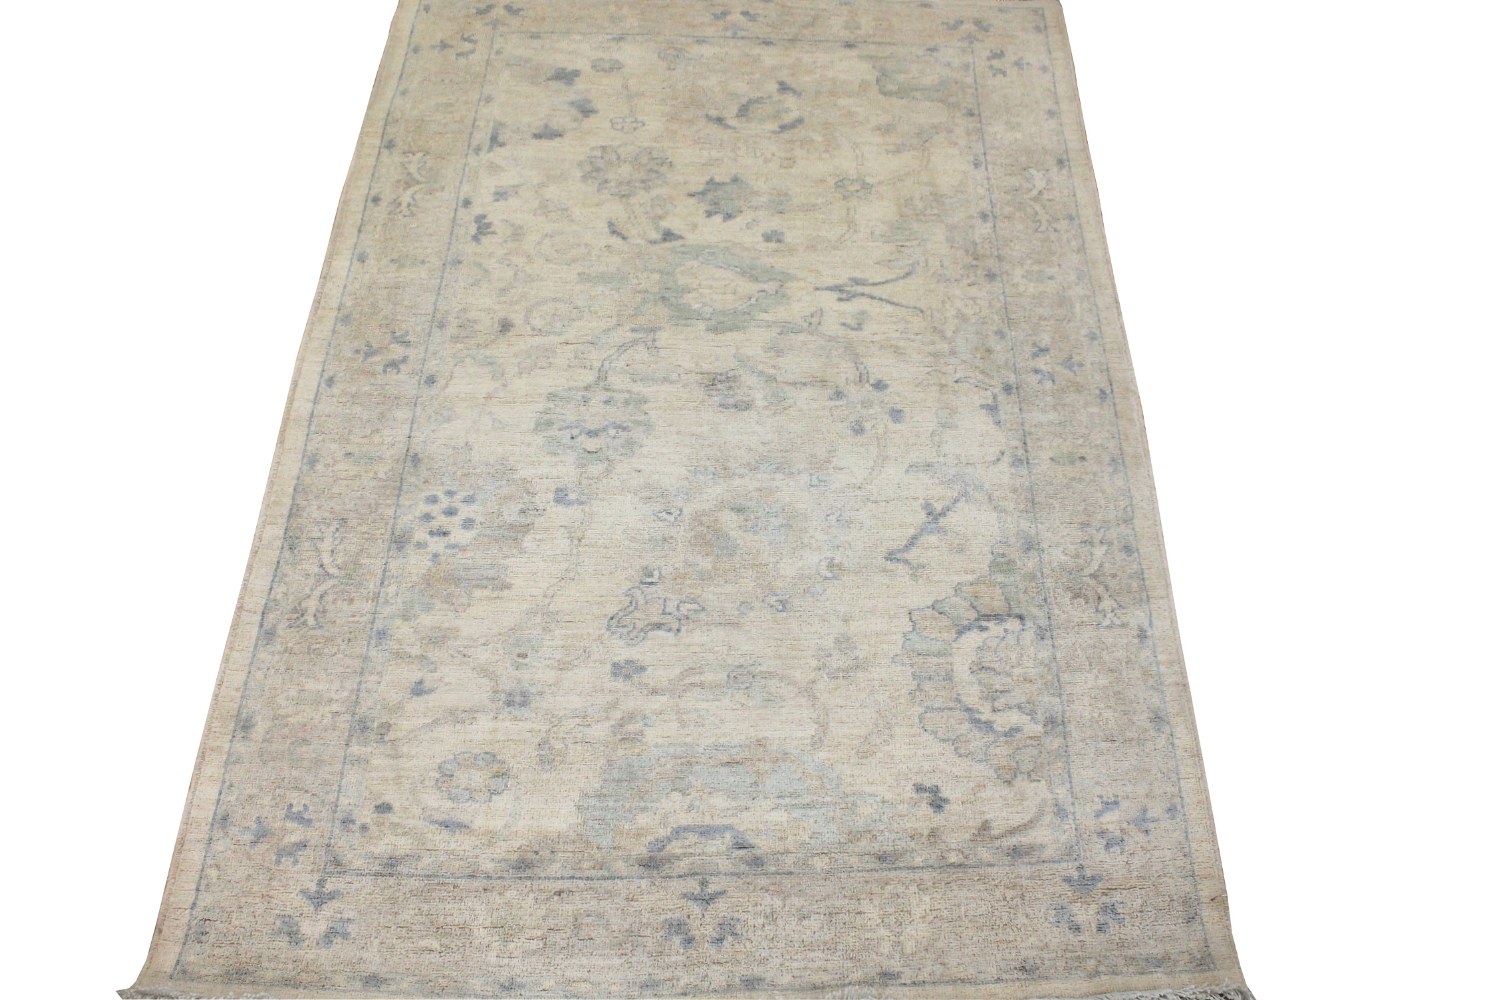 4x6 Aryana & Antique Revivals Hand Knotted Wool Area Rug - MR028826